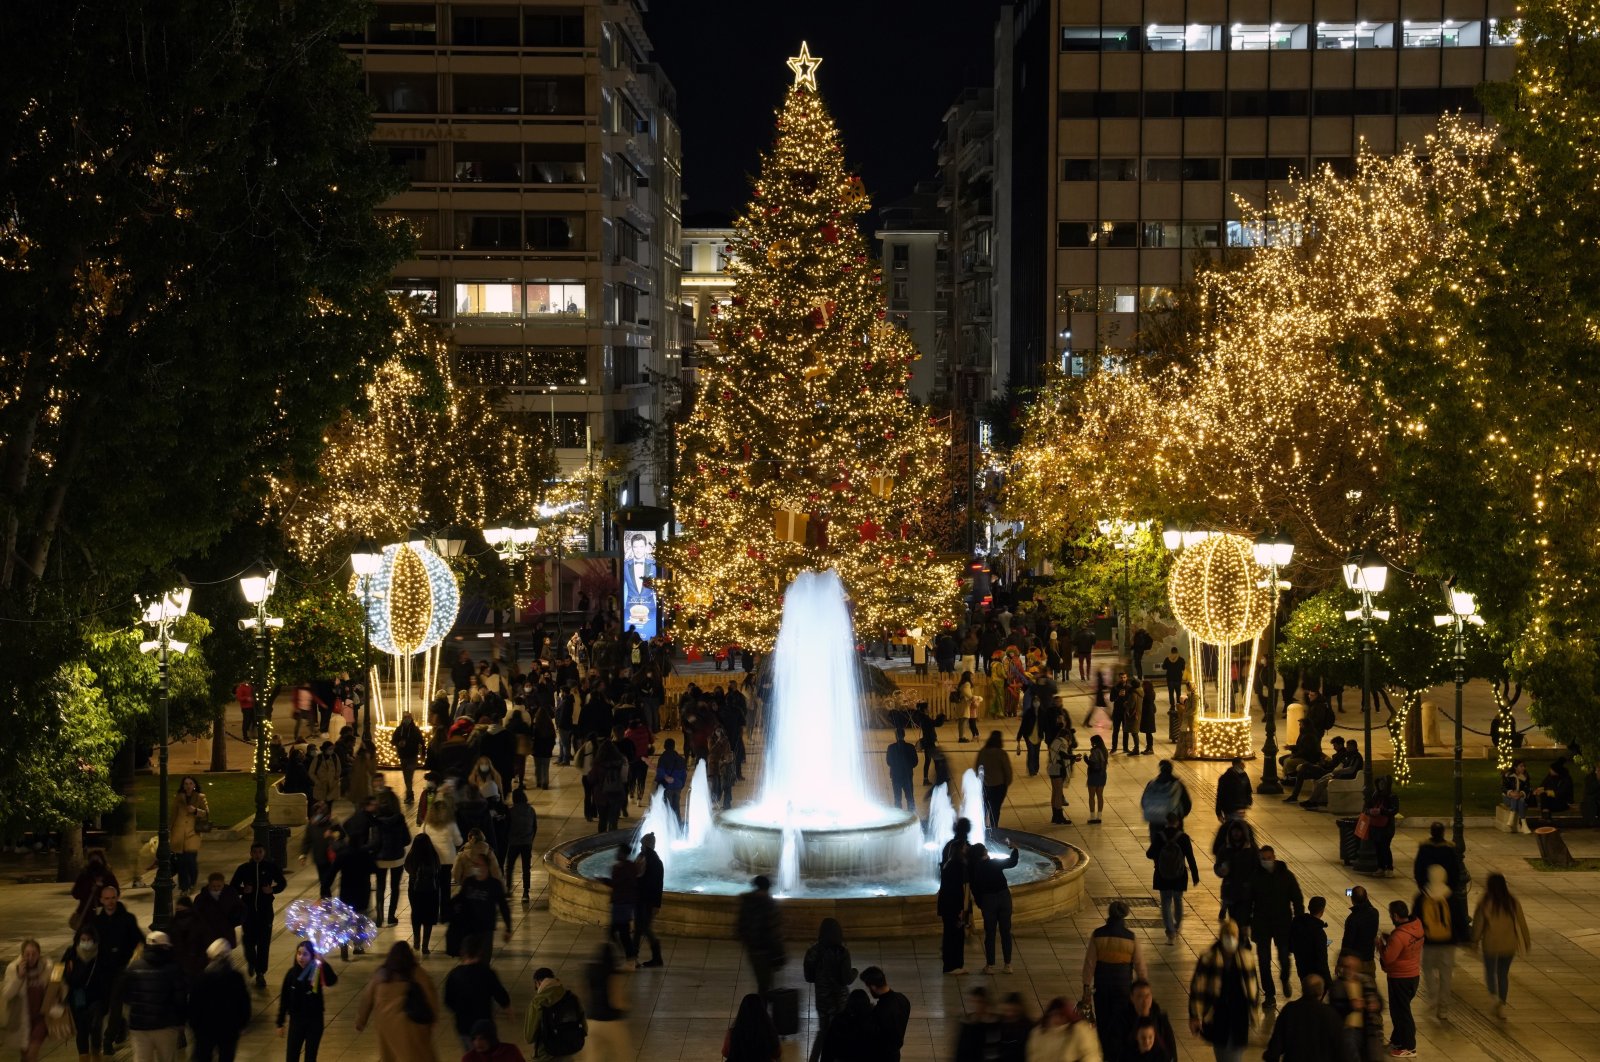 People walk at the Christmas decorated Syntagma square in Athens, Greece, Dec. 15, 2021. (AP Photo)